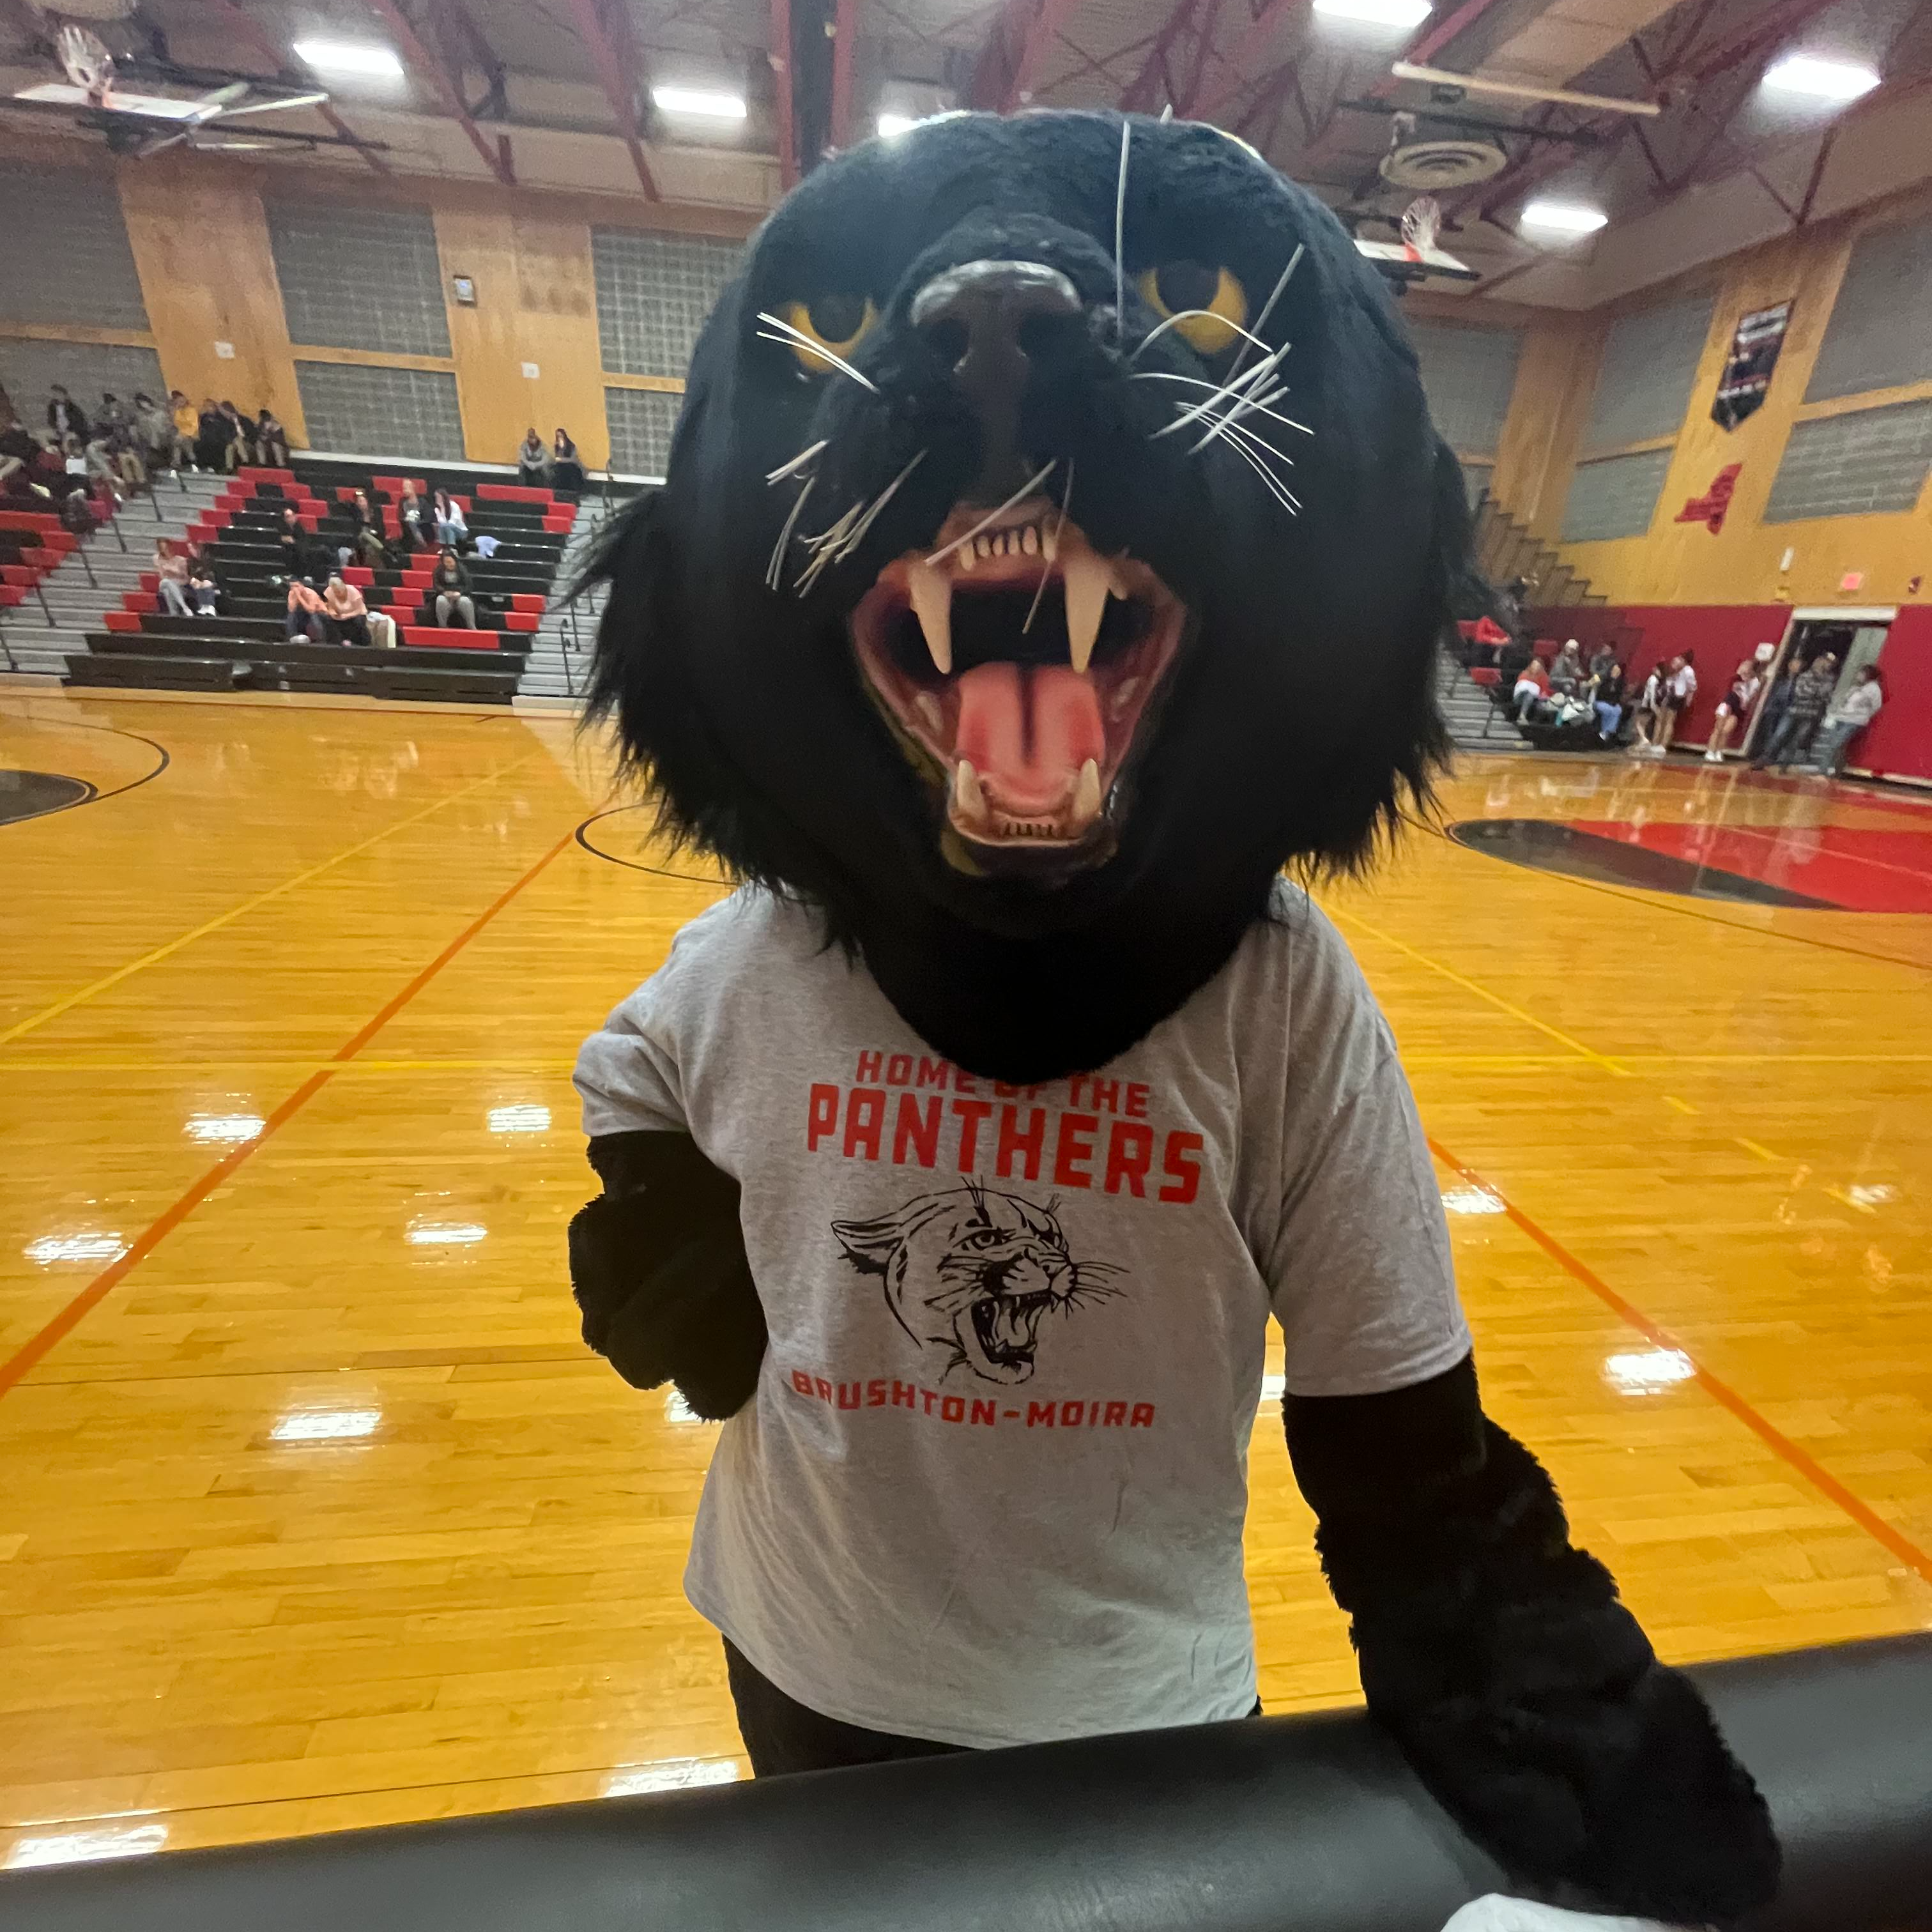 BMC Panther mascot stands in the gymnasium